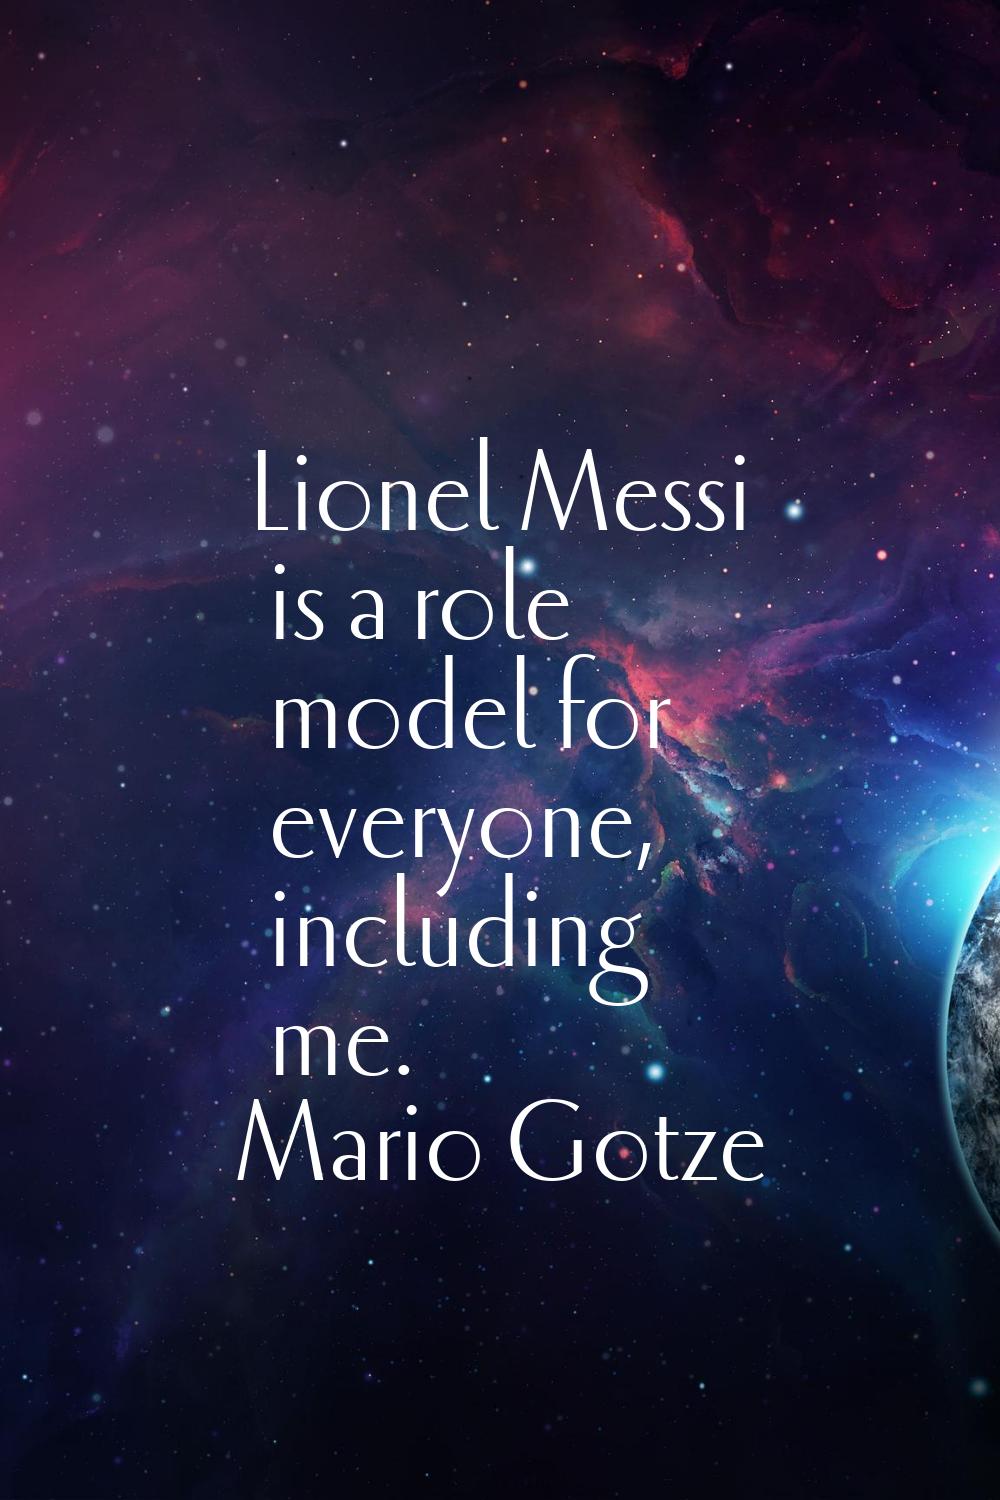 Lionel Messi is a role model for everyone, including me.